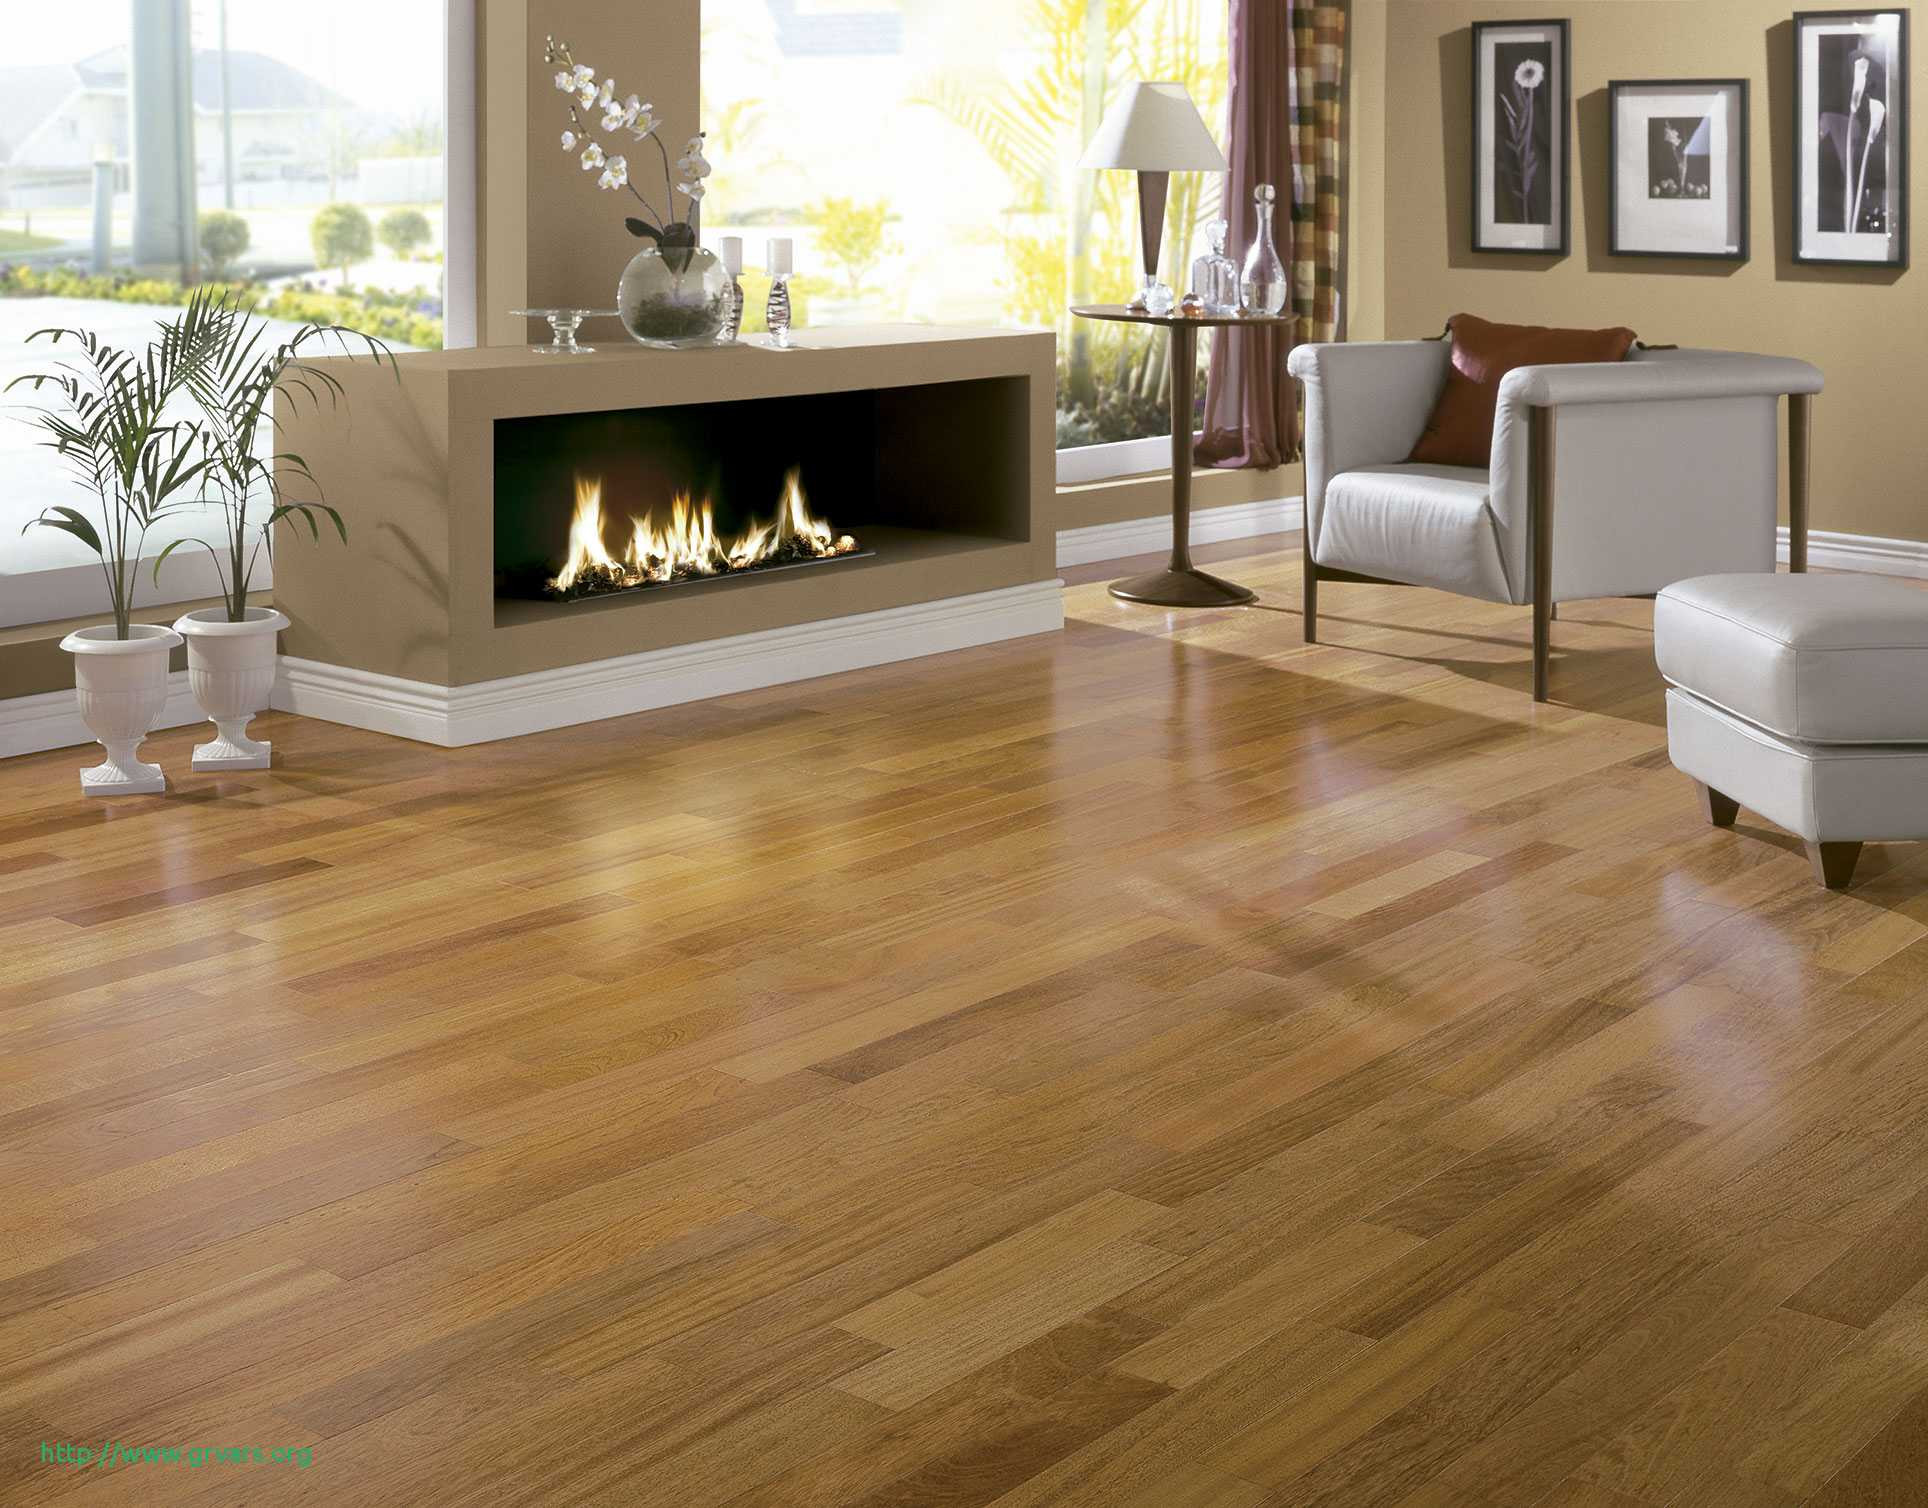 19 Ideal Dd Hardwood Flooring 2024 free download dd hardwood flooring of 20 charmant floting floor ideas blog within full size of bedroom cute discount hardwood flooring 6 brazilian cherry 1920x1508 discount hardwood flooring